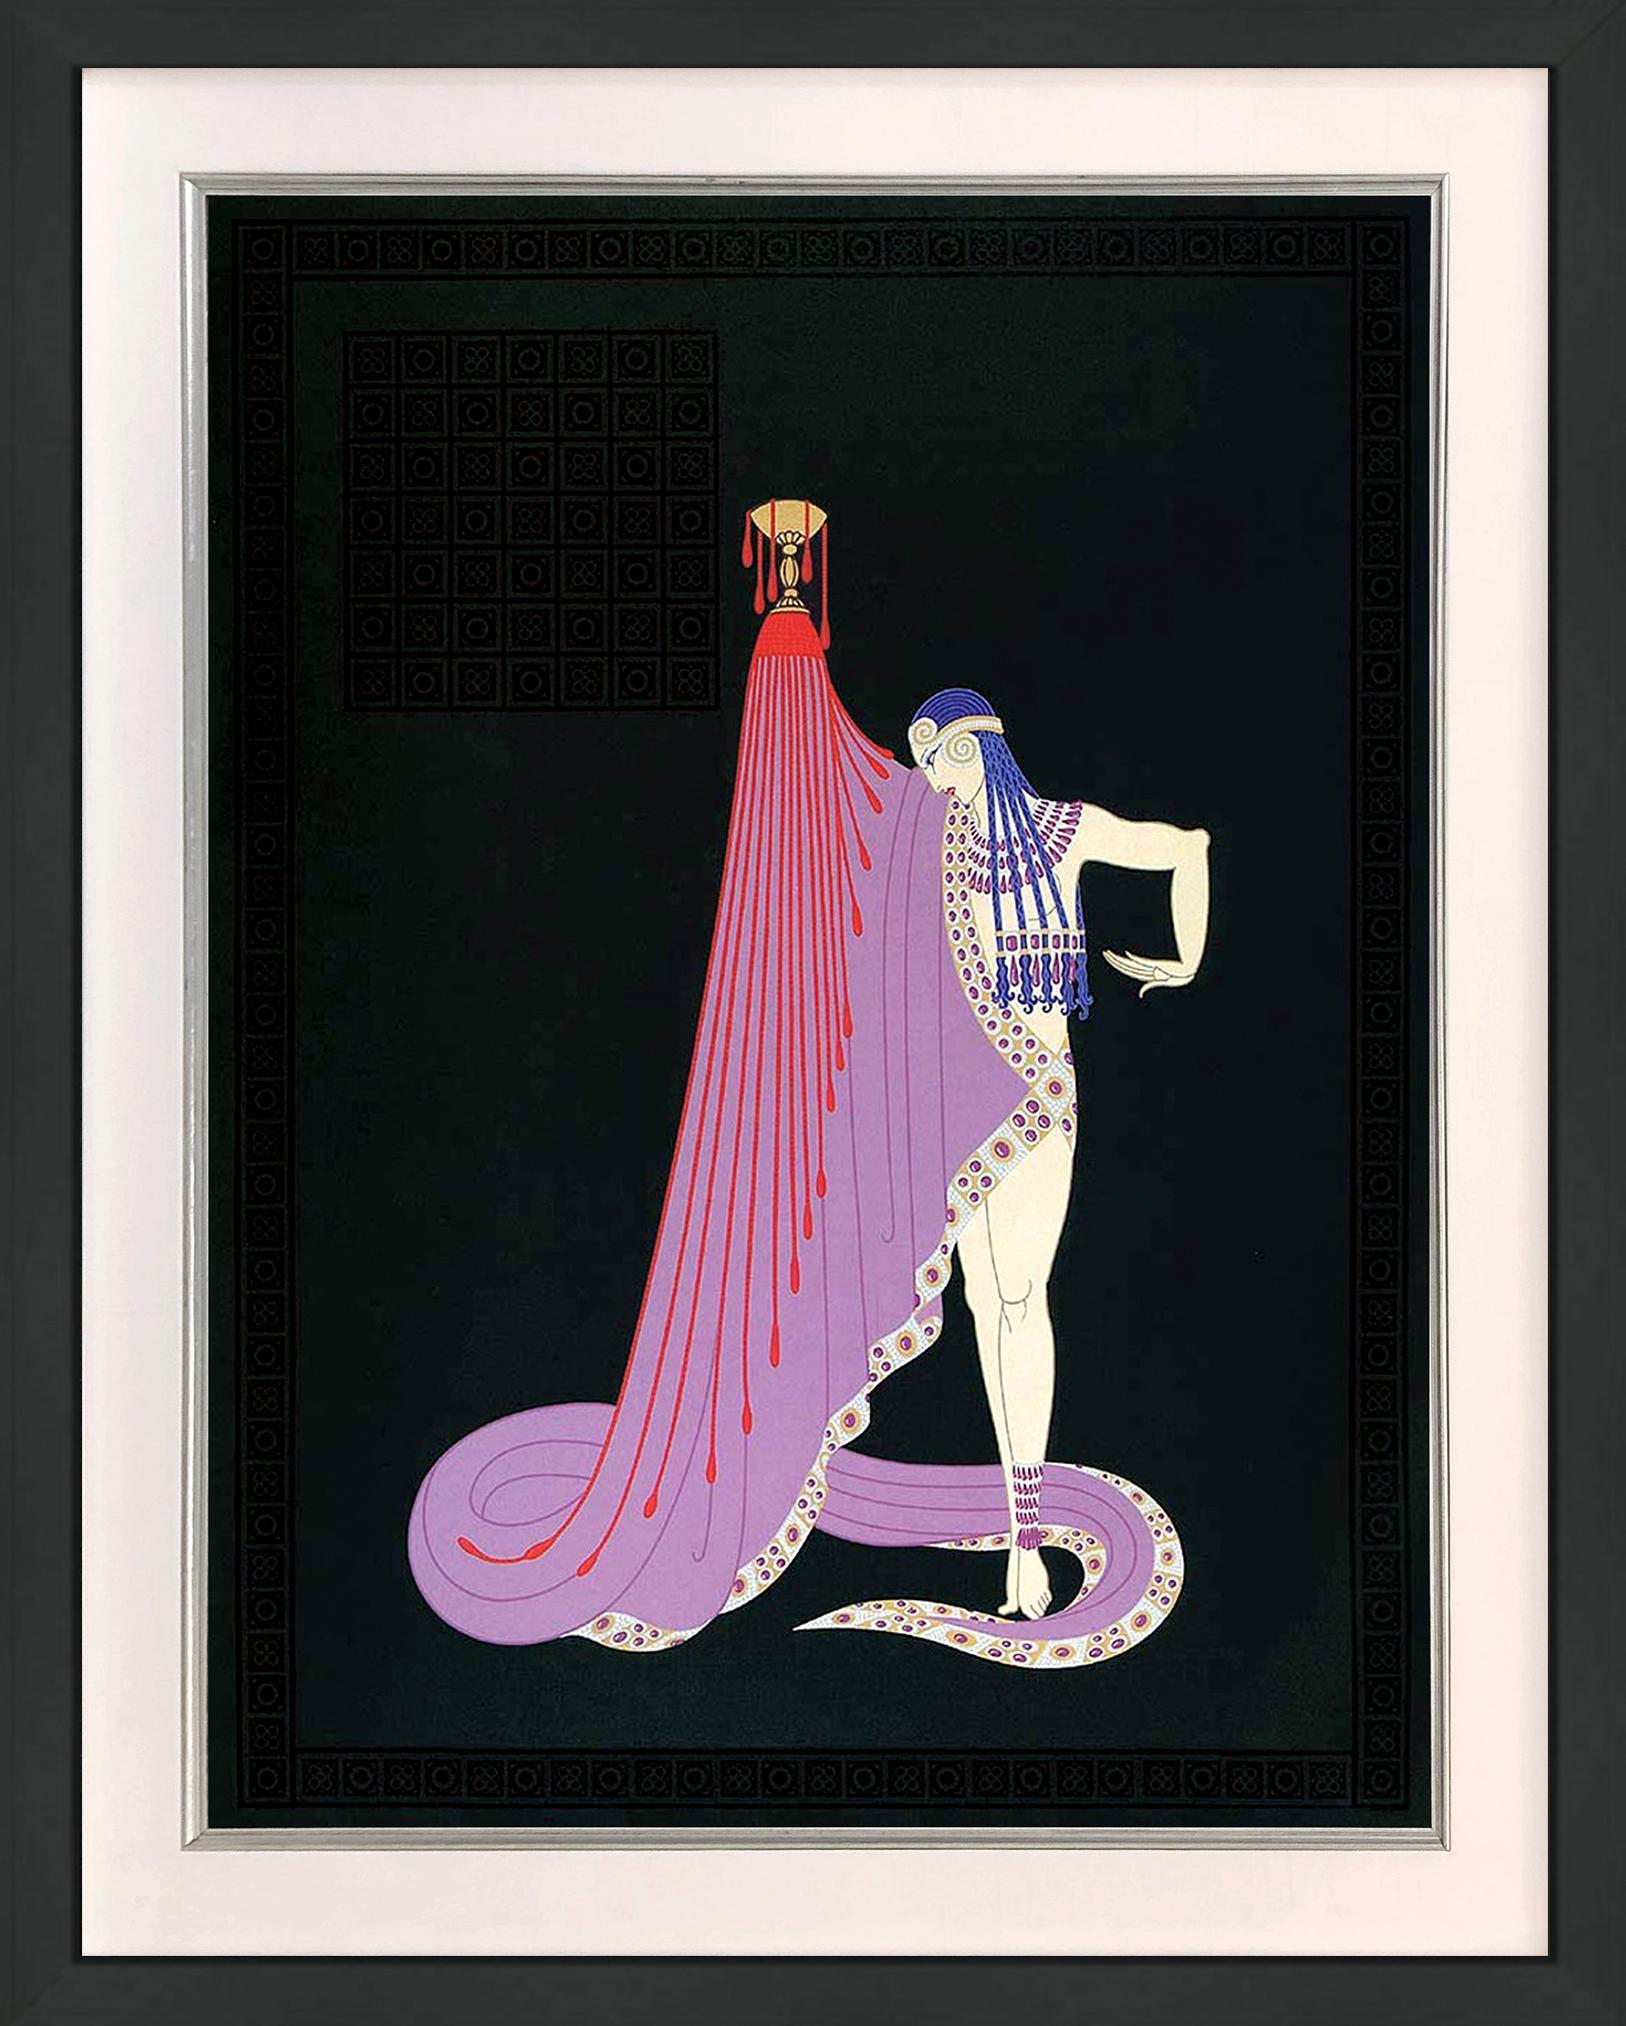 What type of artwork did Erté create?